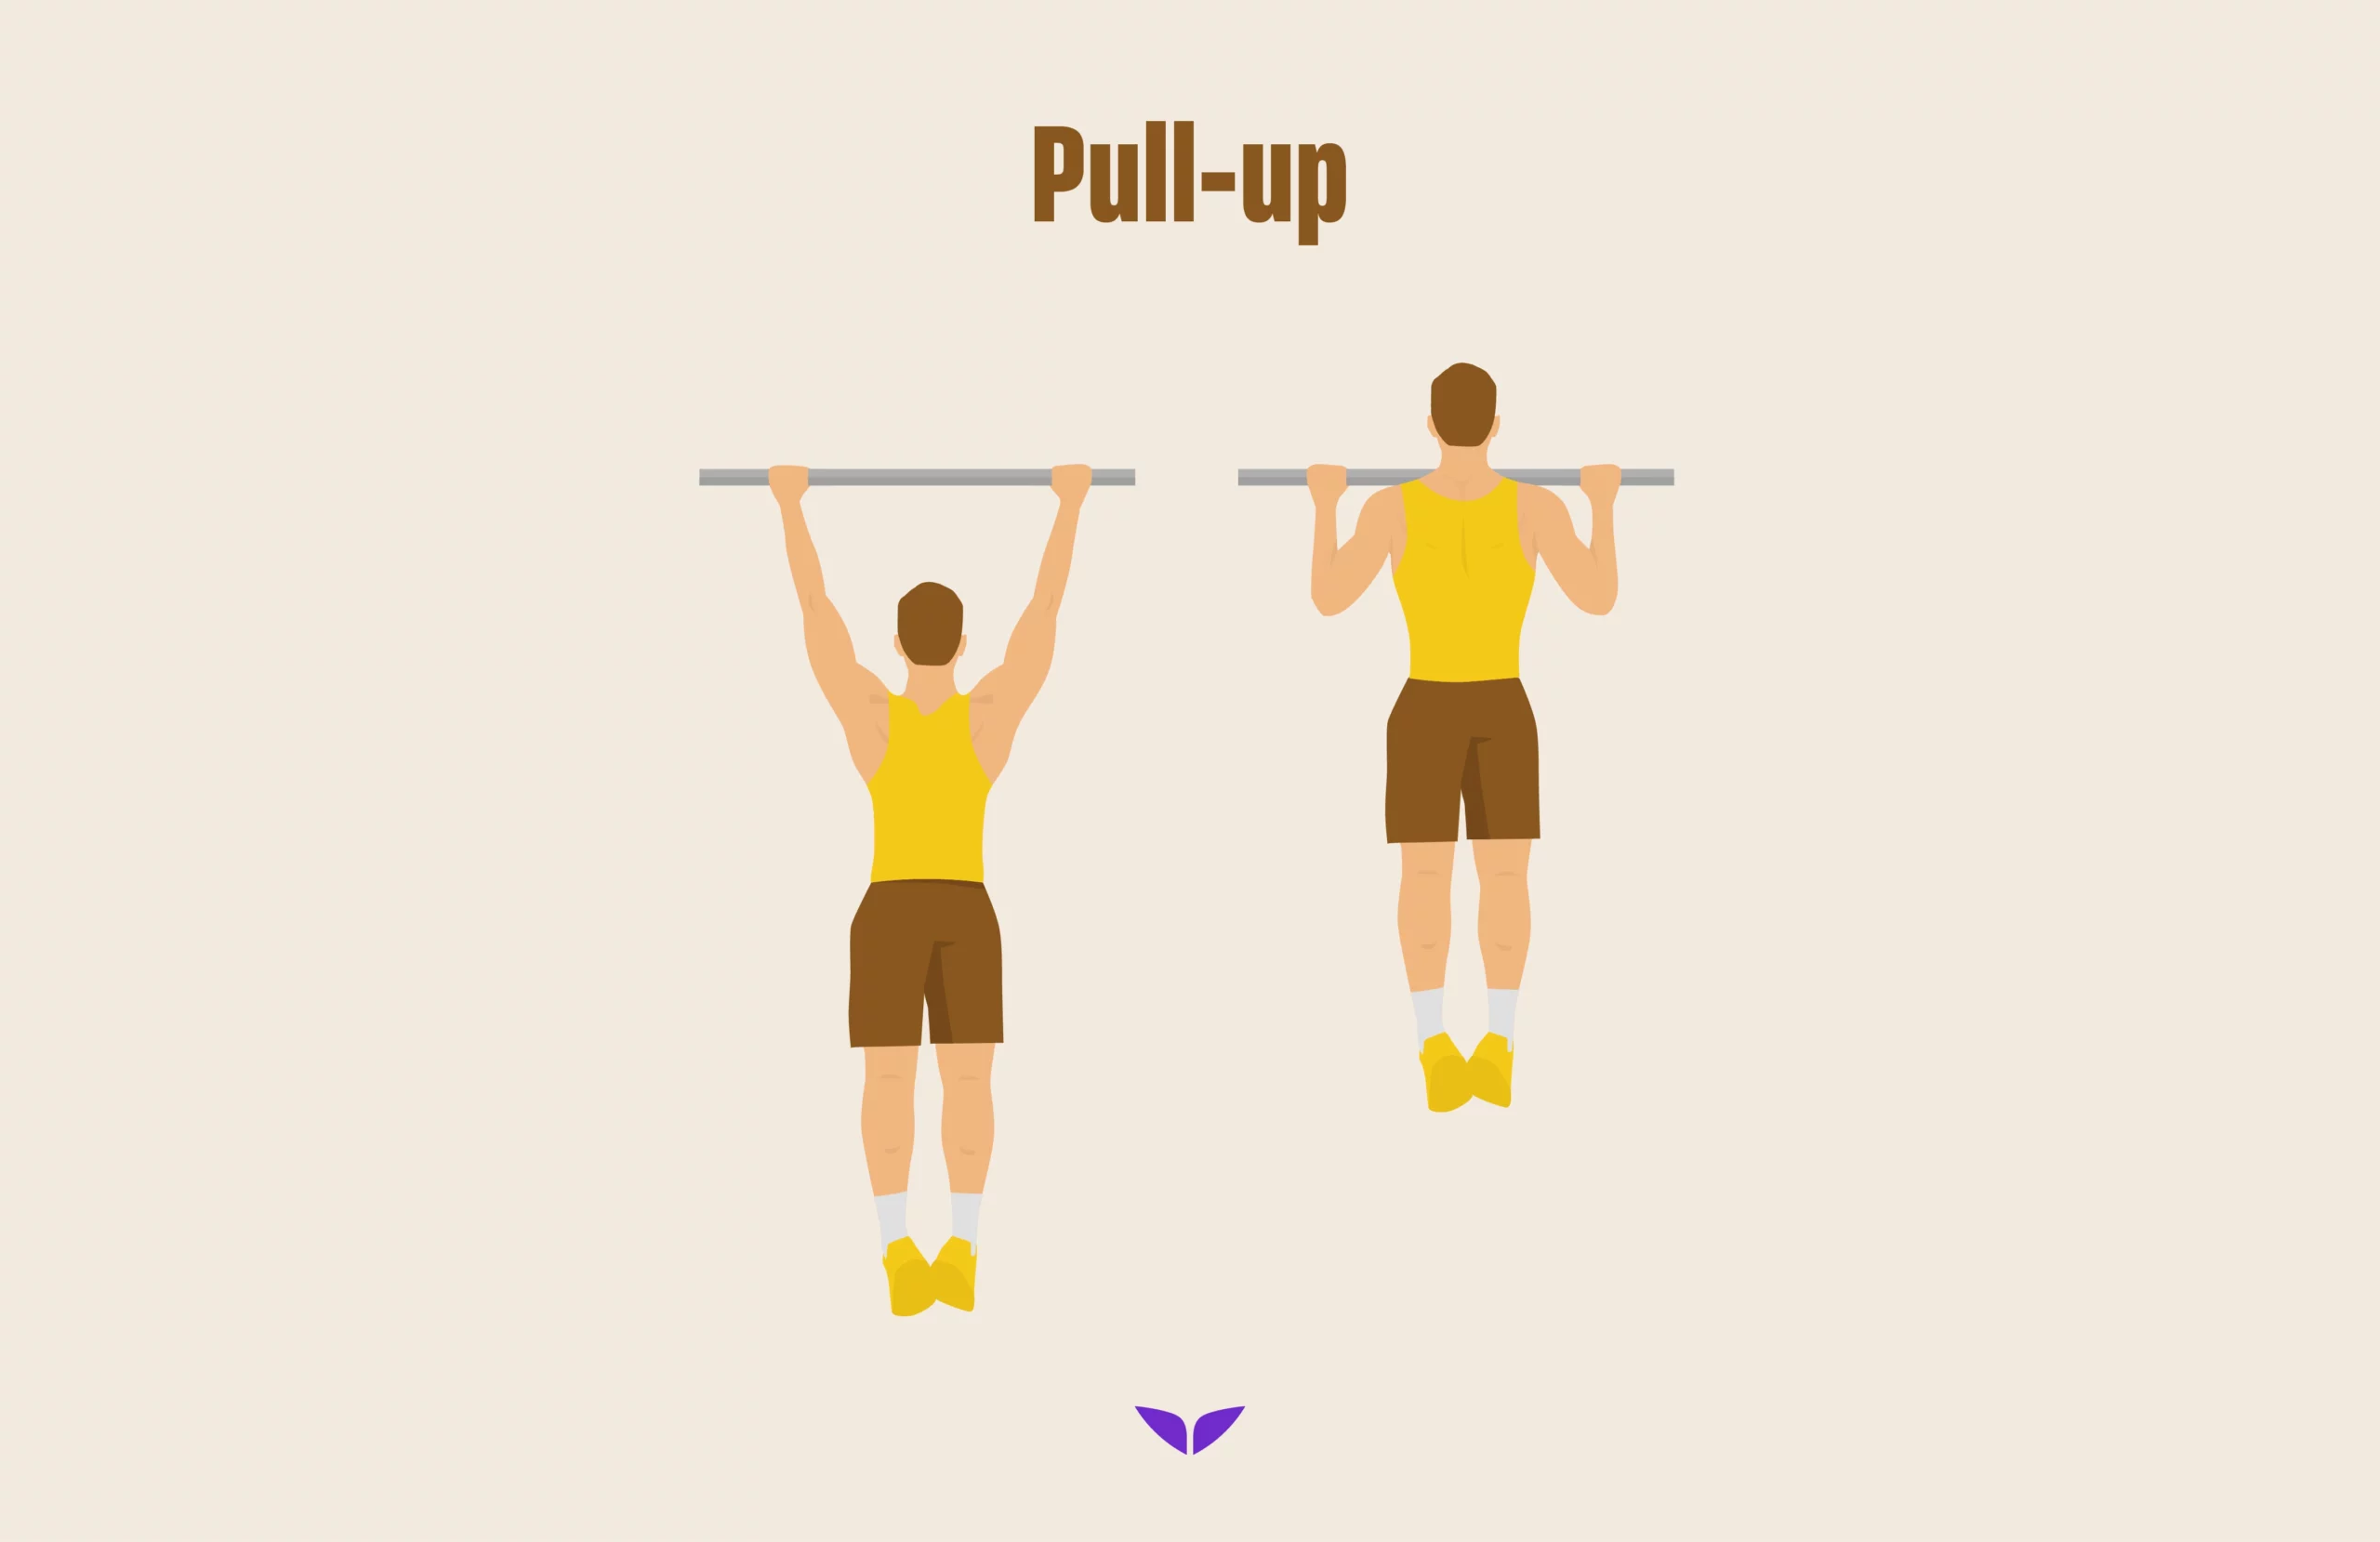 Pull-up (or chin-up)